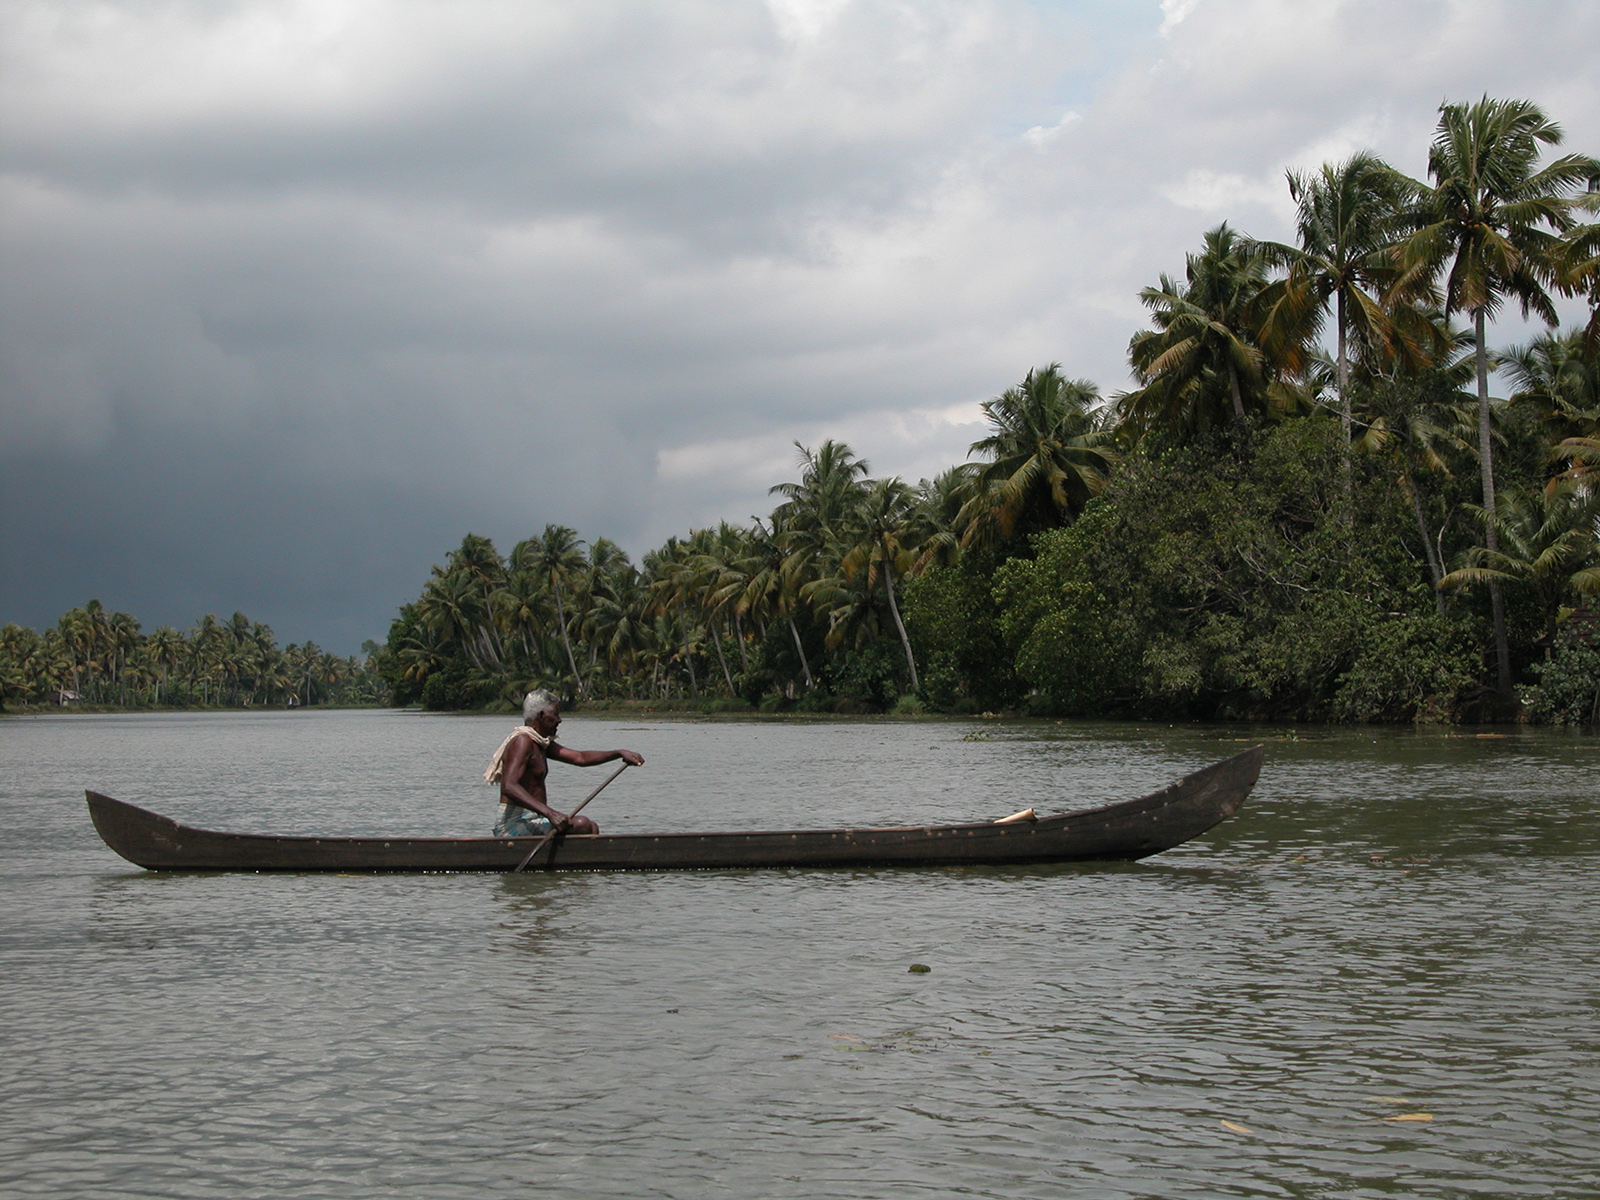 a man on a canoe trying to get home before the storm in Kerala's backwaters, in south India